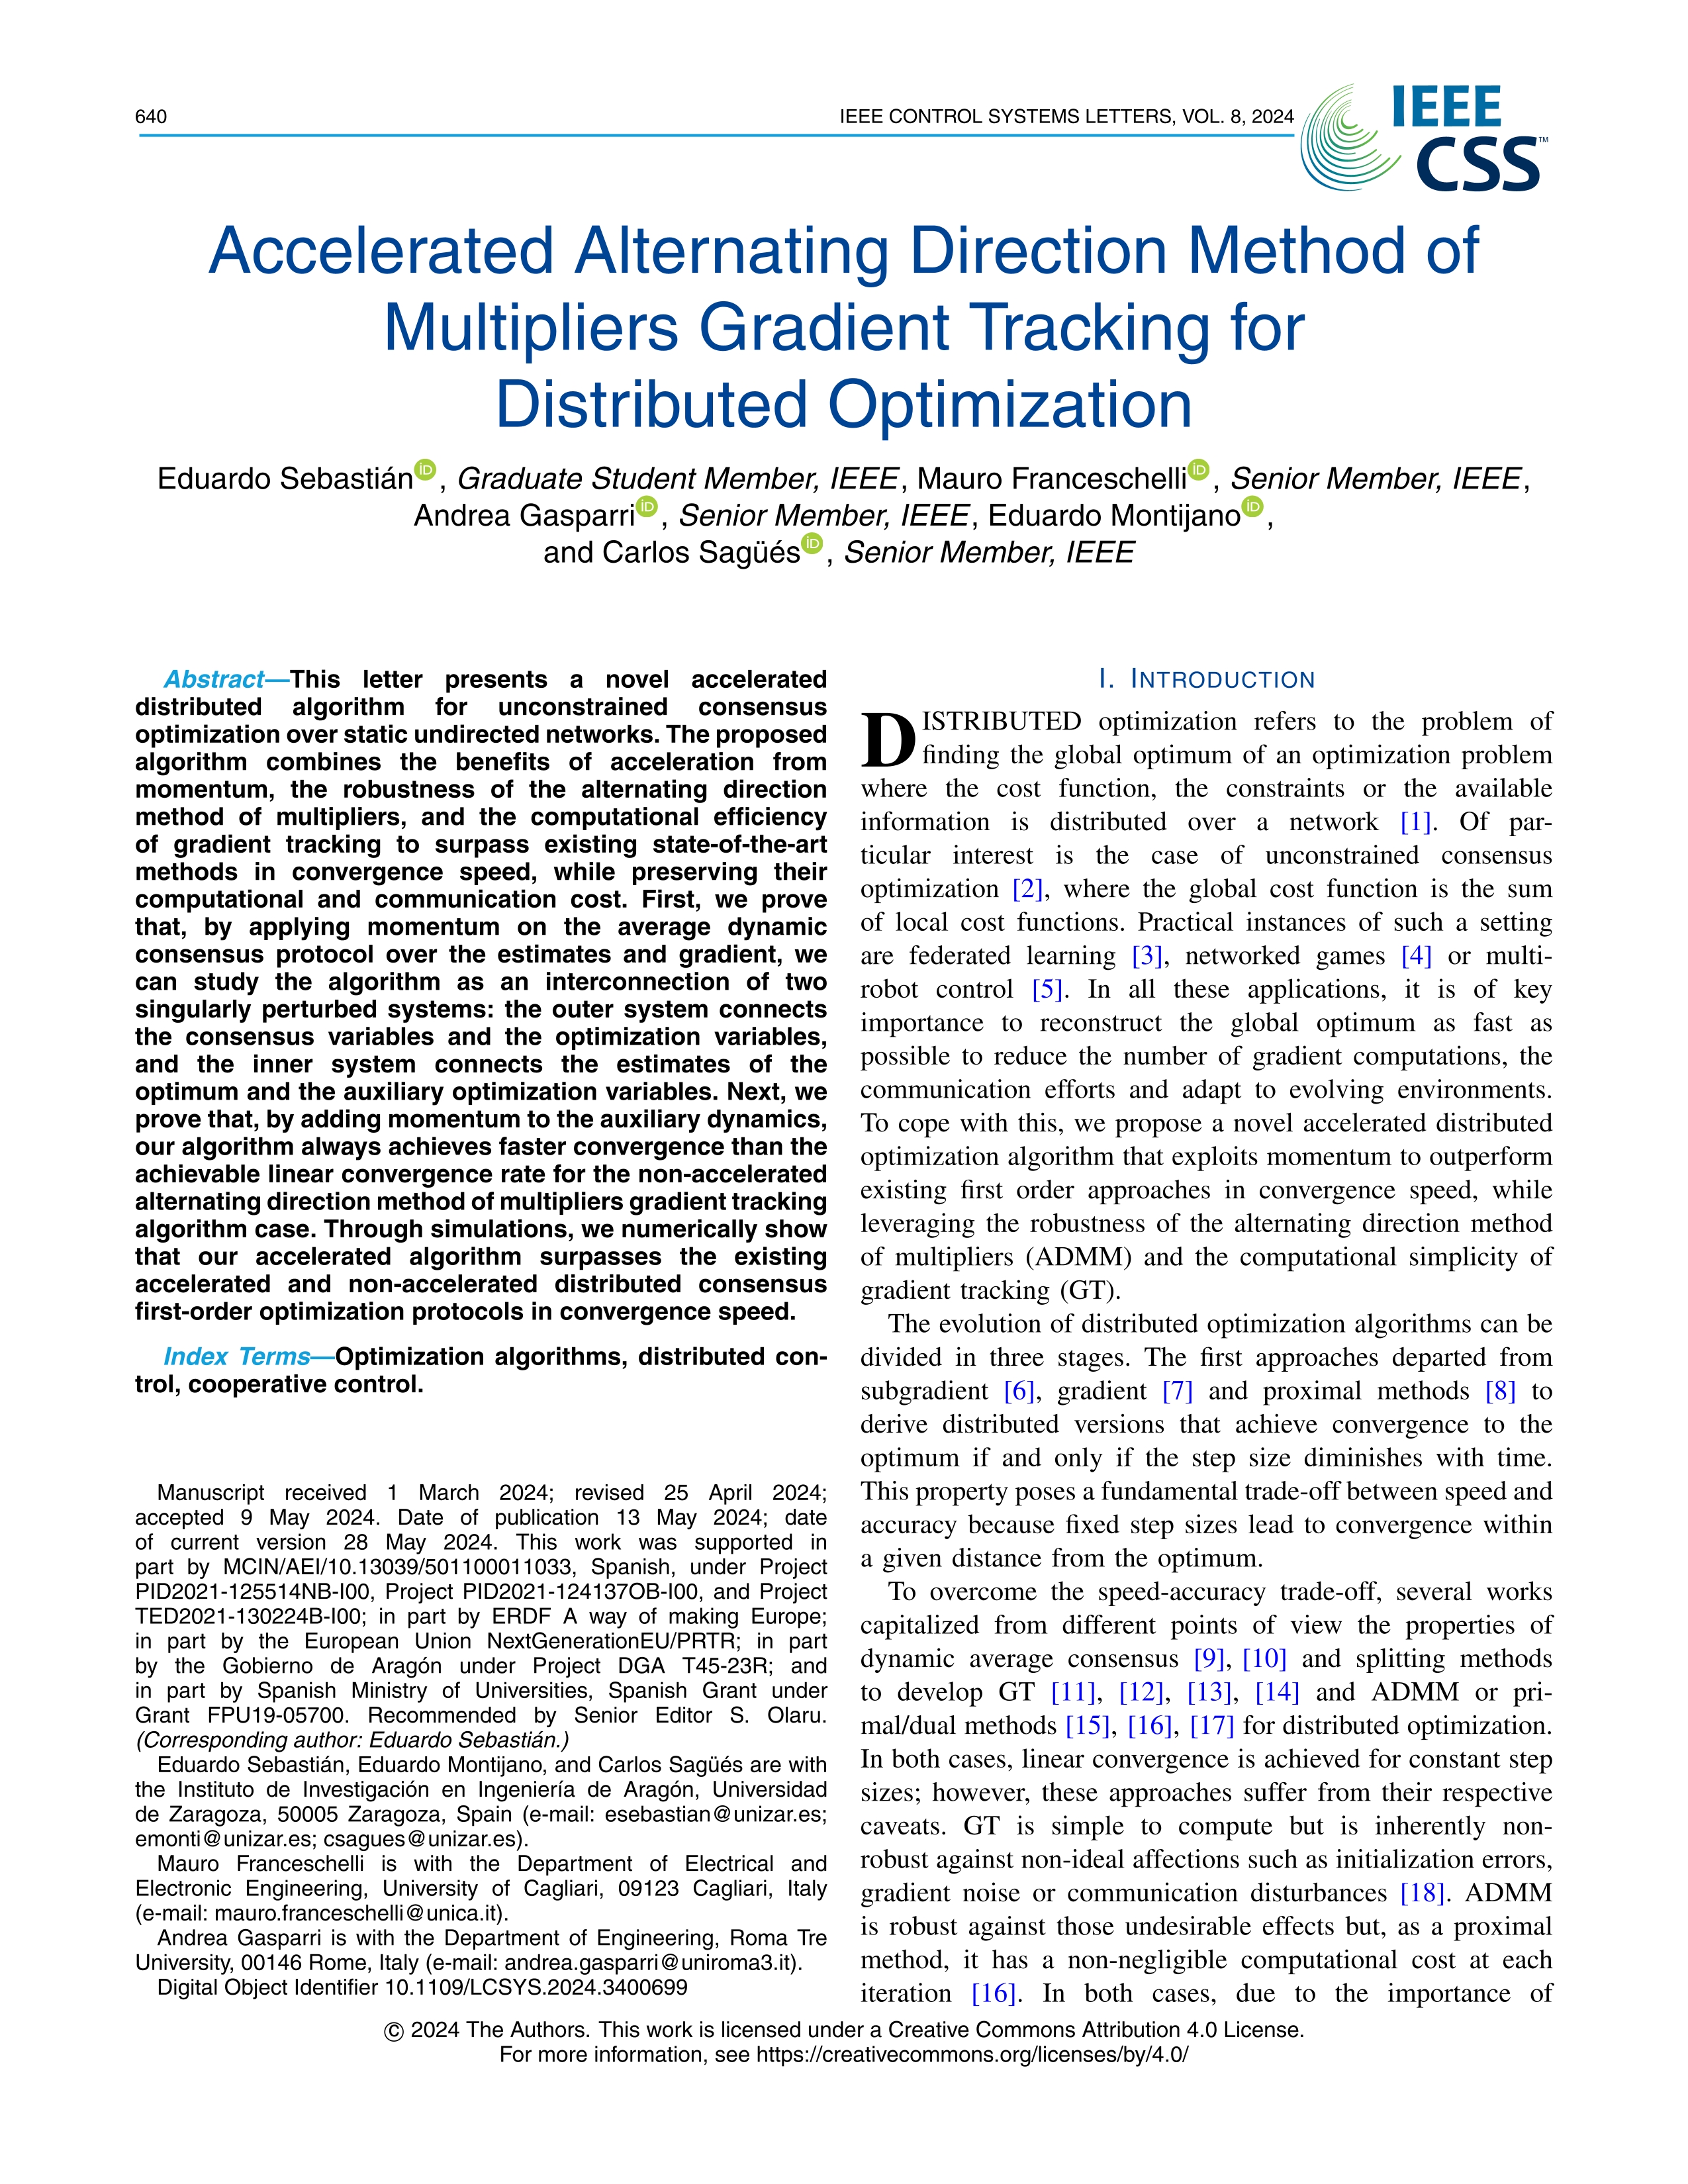 Accelerated Alternating Direction Method of Multipliers Gradient Tracking for Distributed Optimization